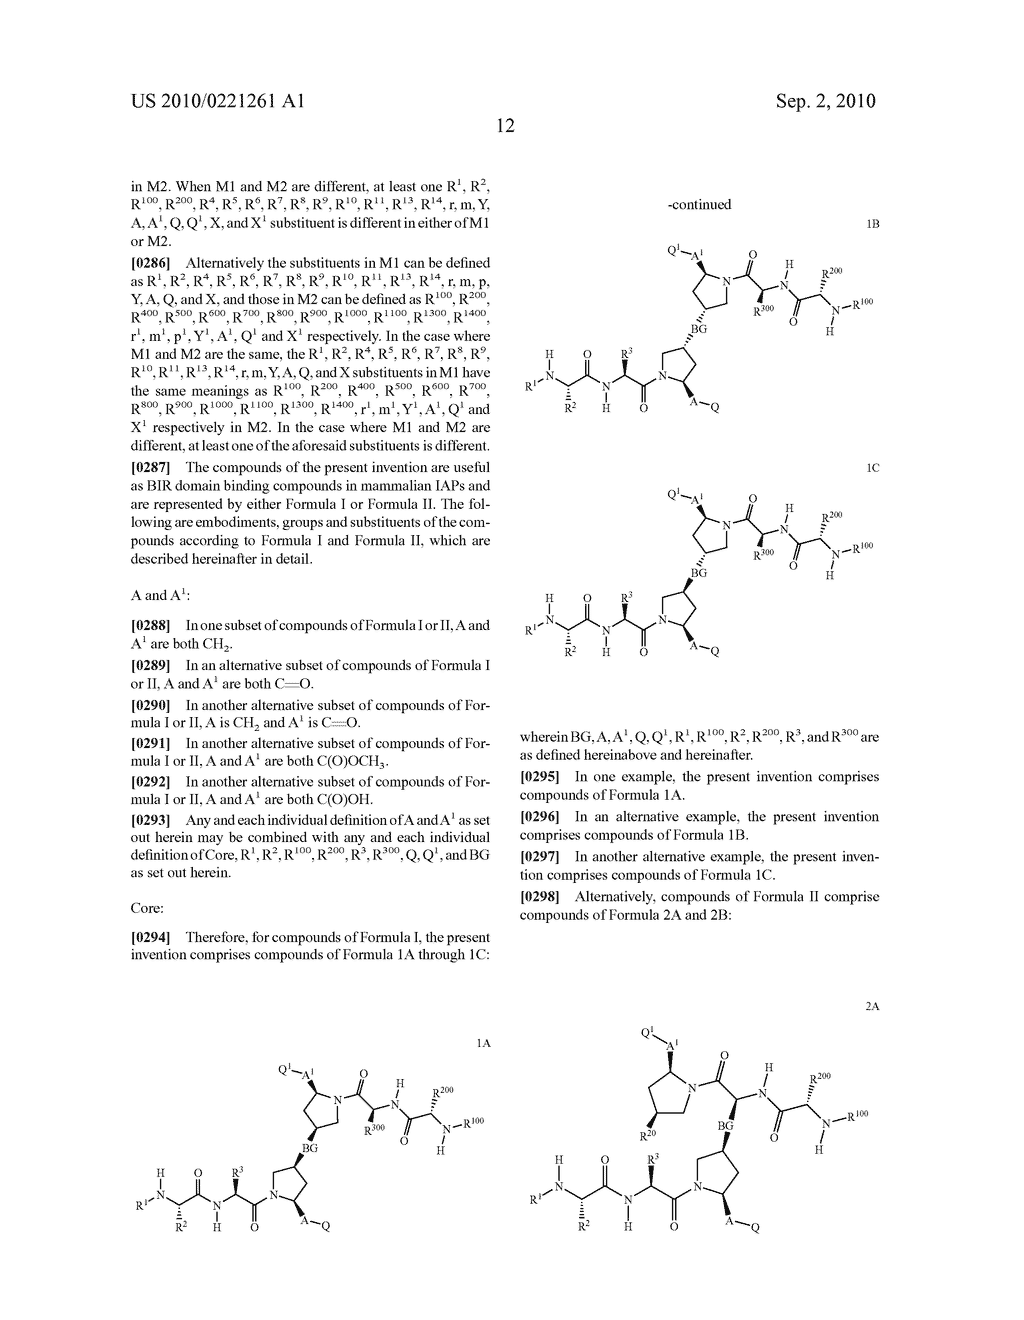 IAP BIR DOMAIN BINDING COMPOUNDS - diagram, schematic, and image 15